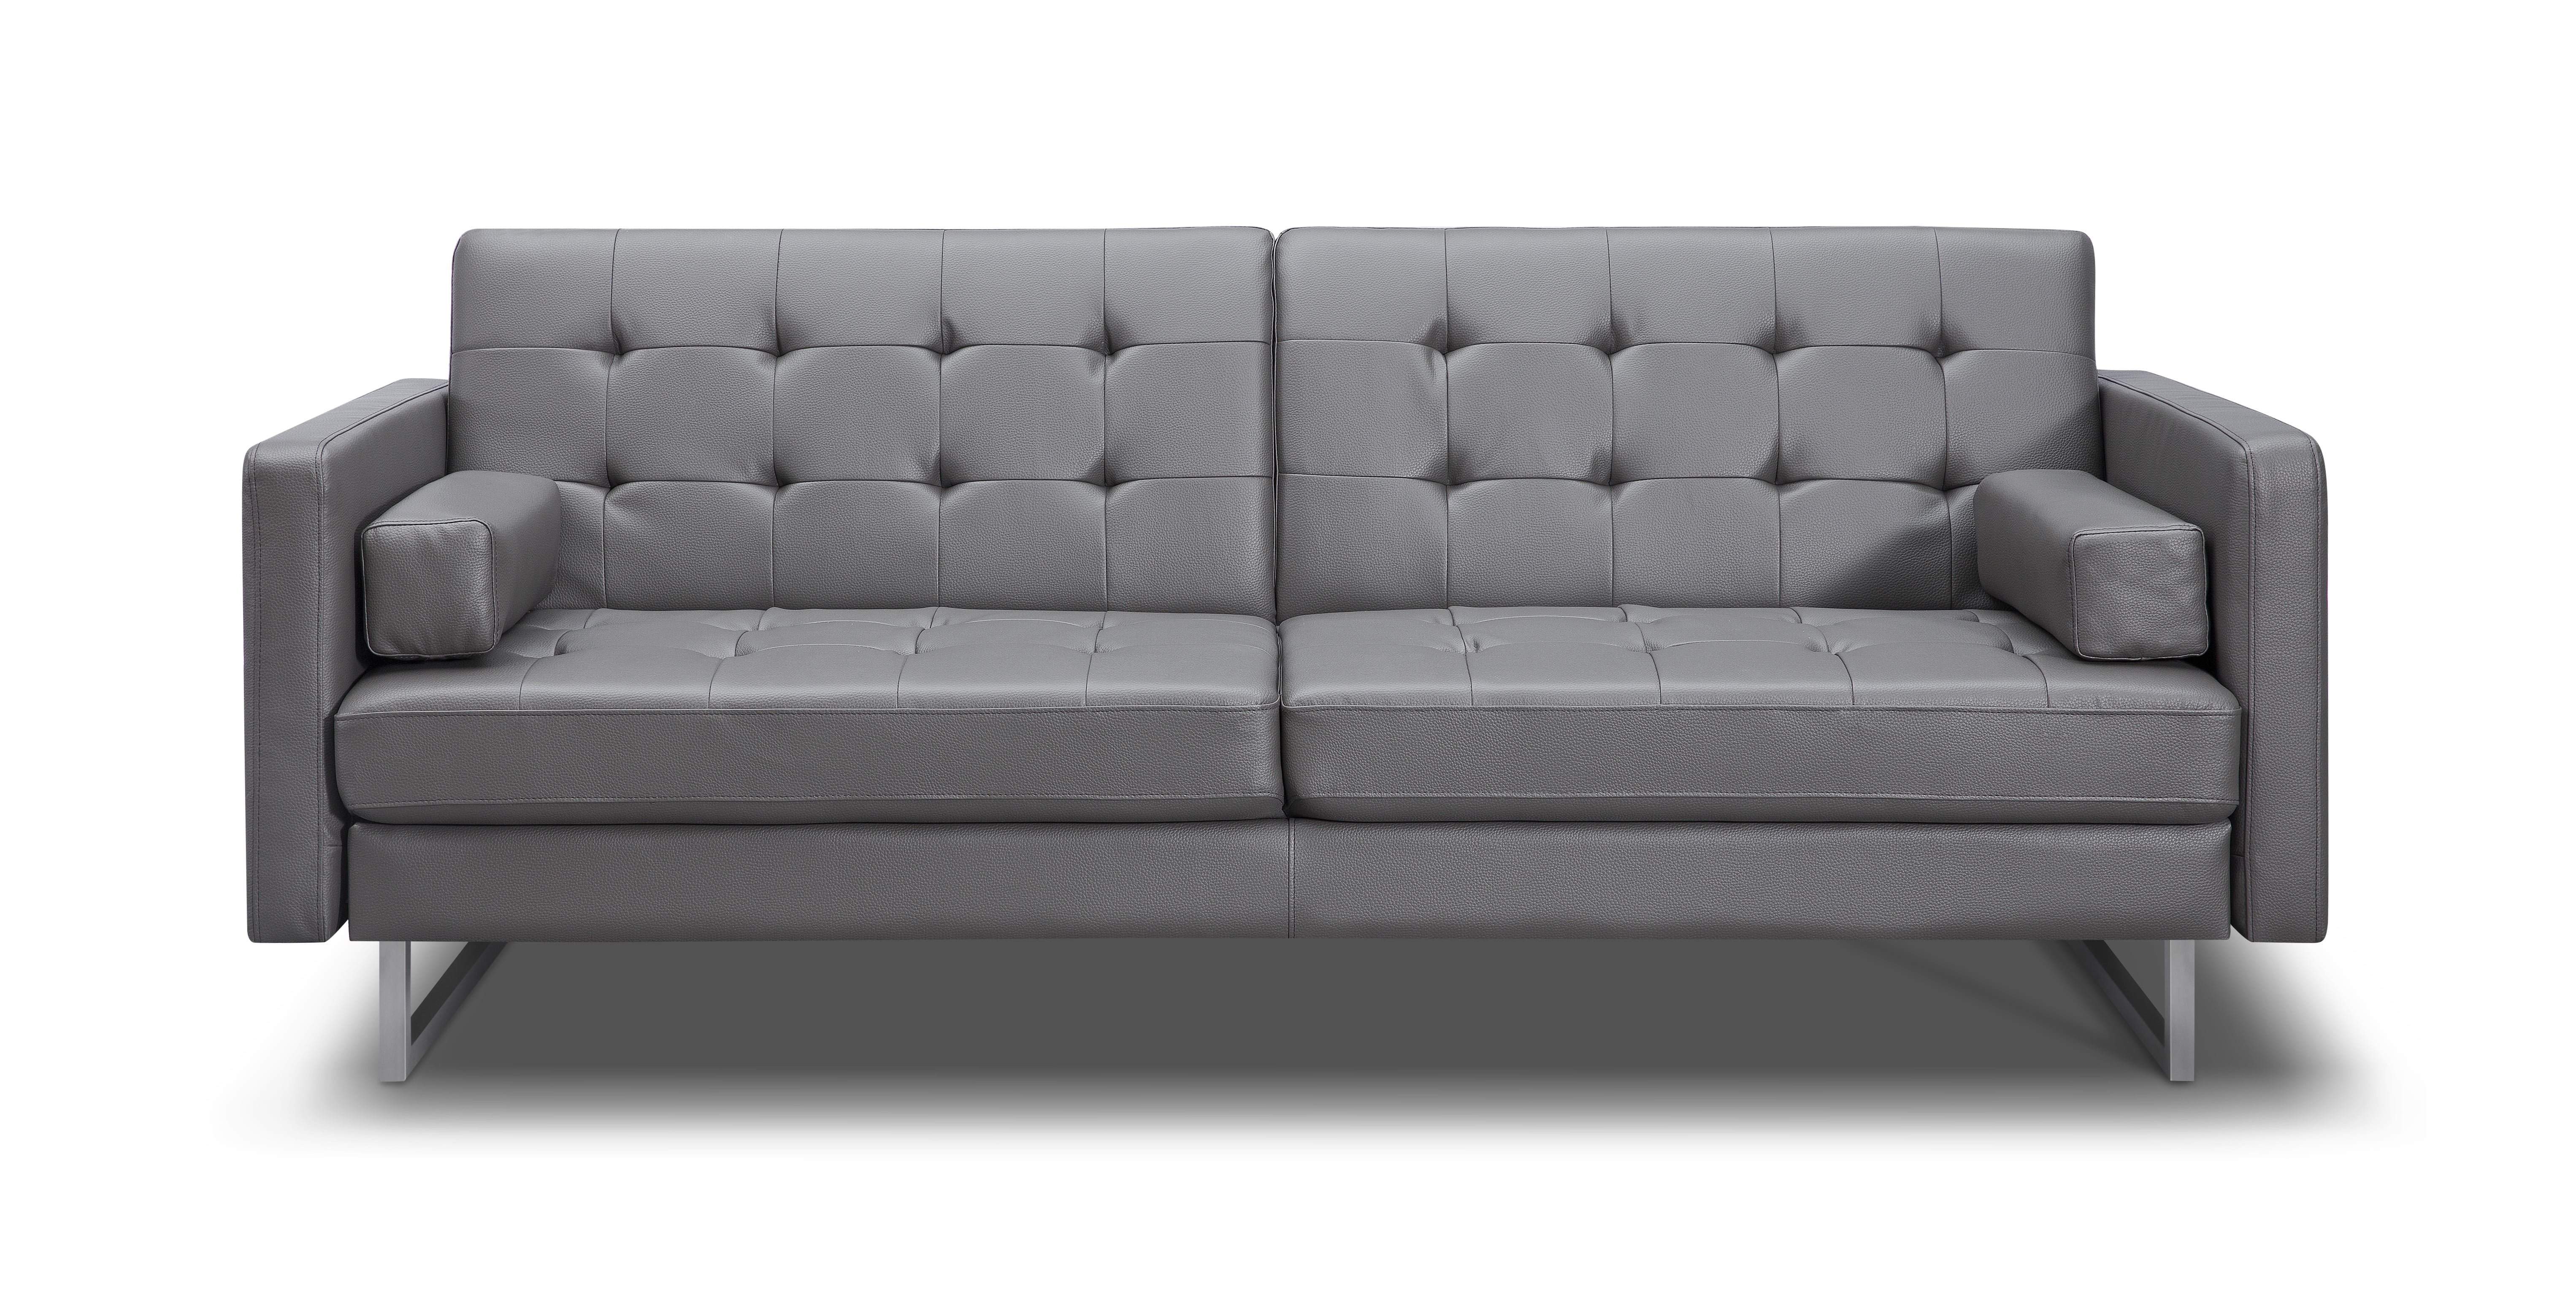 gray leather sofa beds